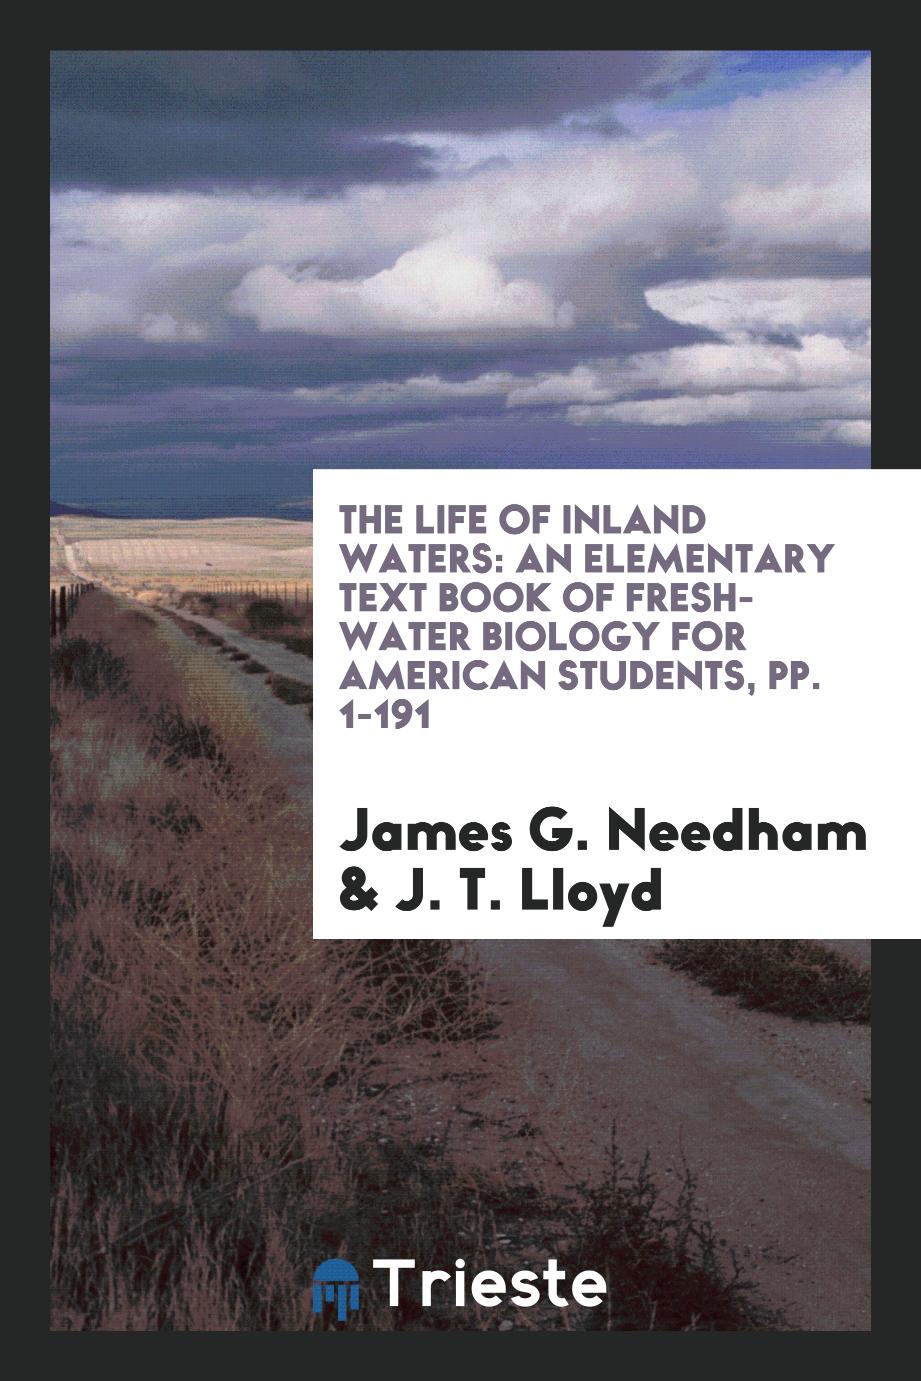 The Life of Inland Waters: An Elementary Text Book of Fresh-Water Biology for American Students, pp. 1-191